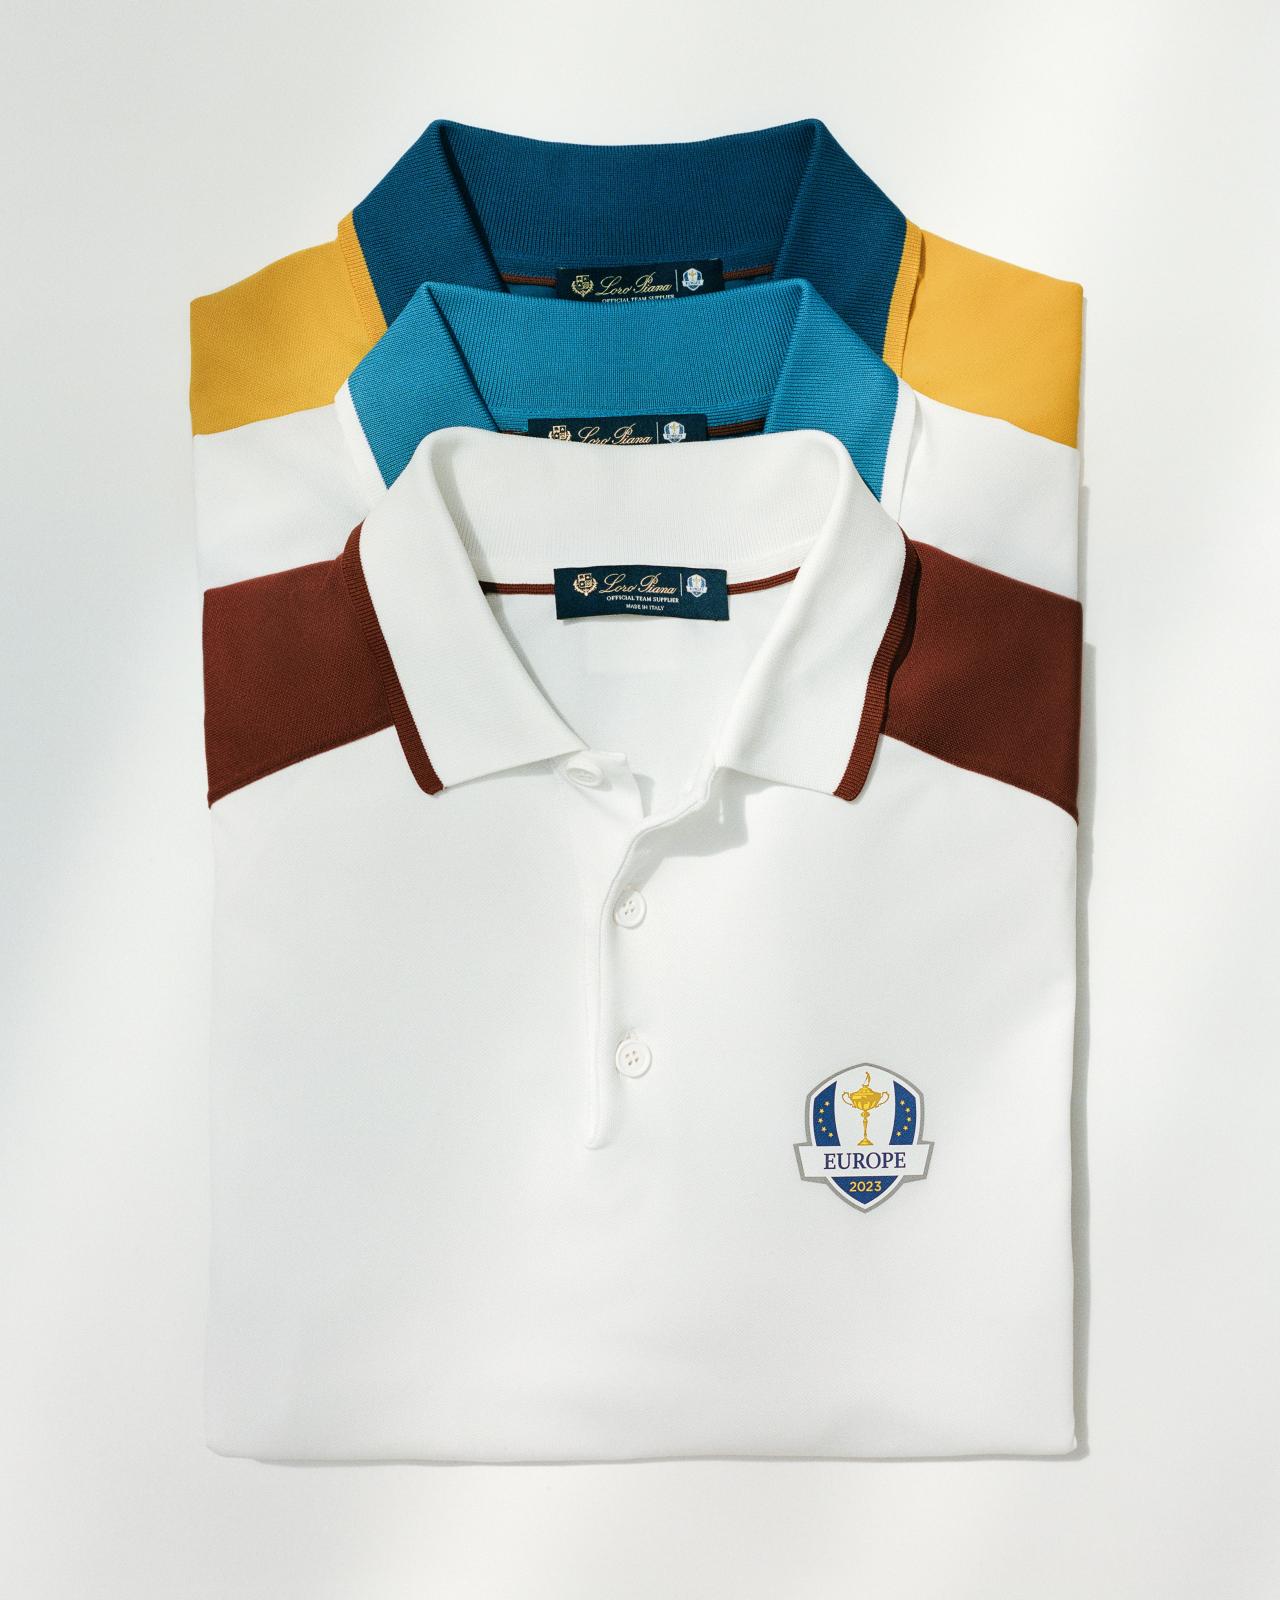 Ryder Cup 2023: A look at the luxe European Ryder Cup uniforms by 